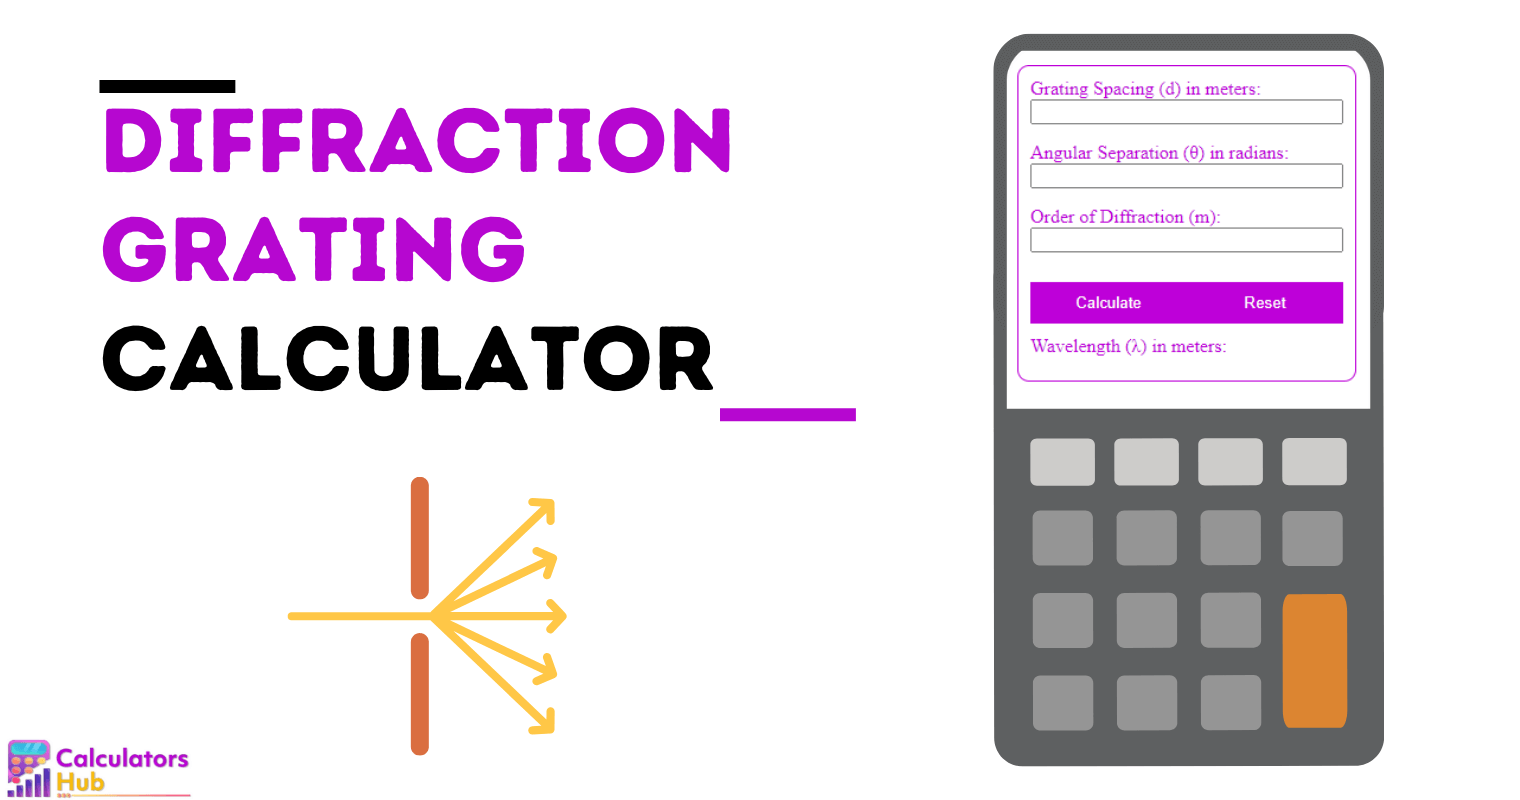 Diffraction Grating Calculator